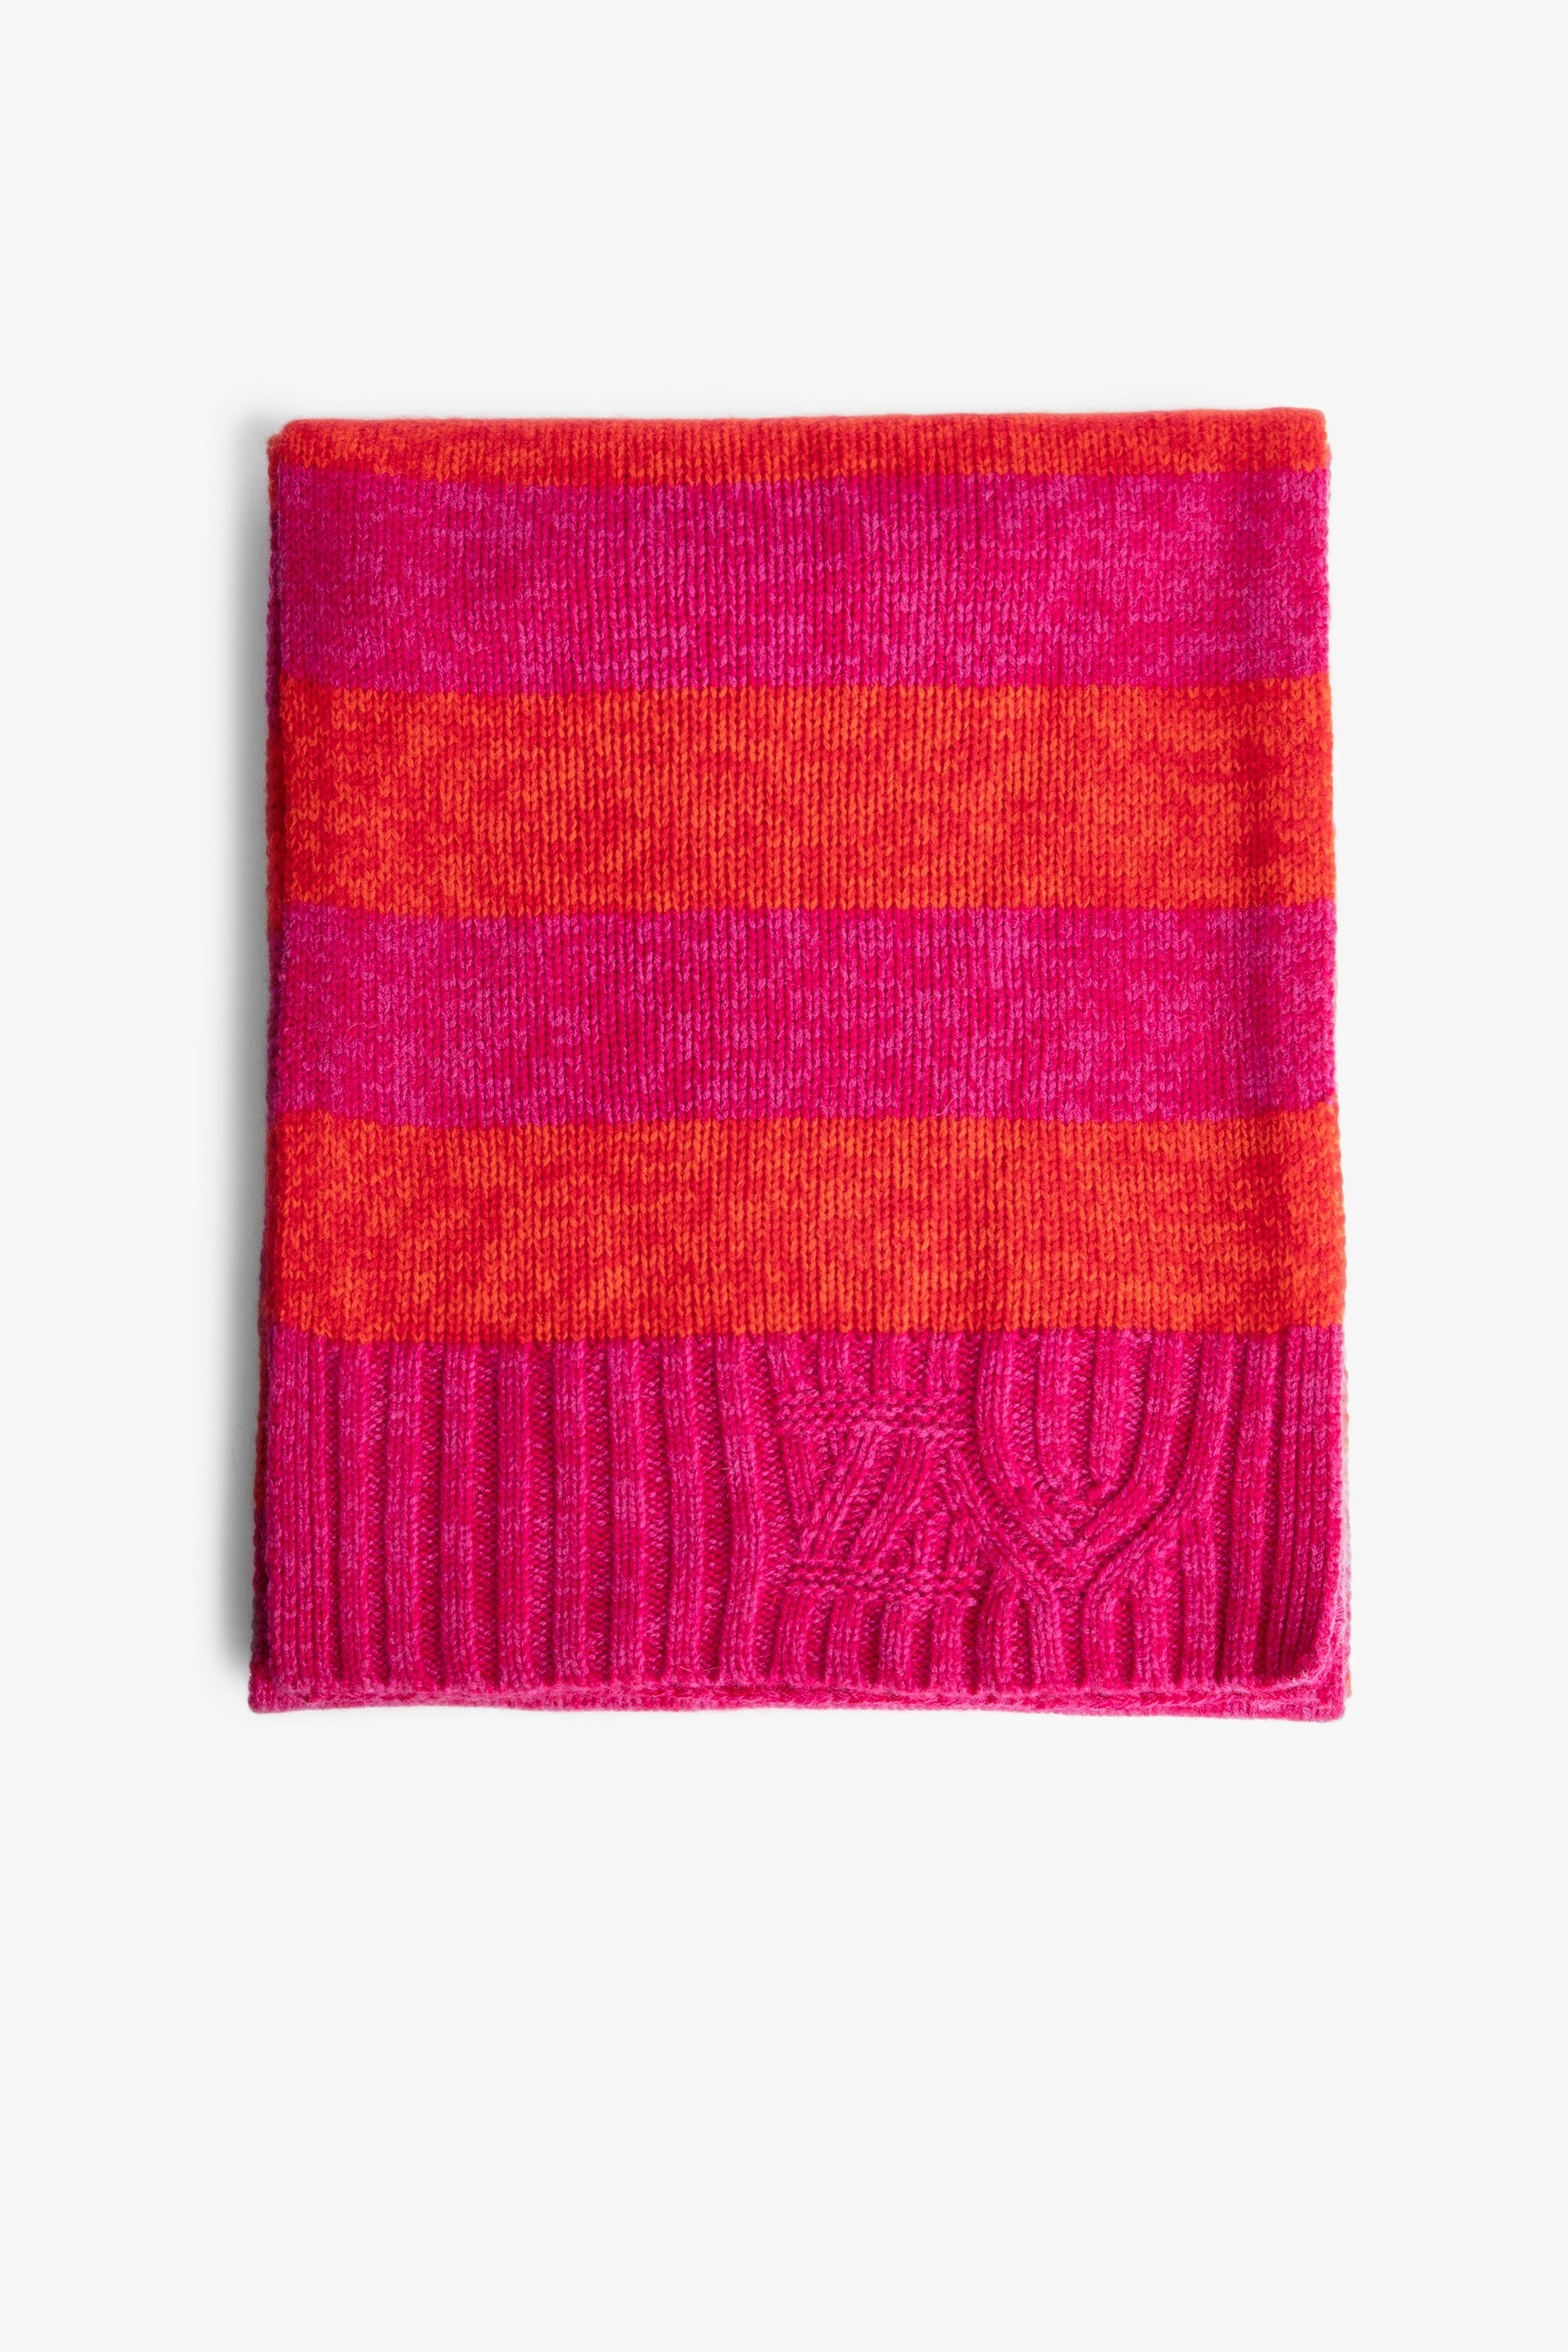 Shay カシミヤ ストール Women's striped cashmere scarf